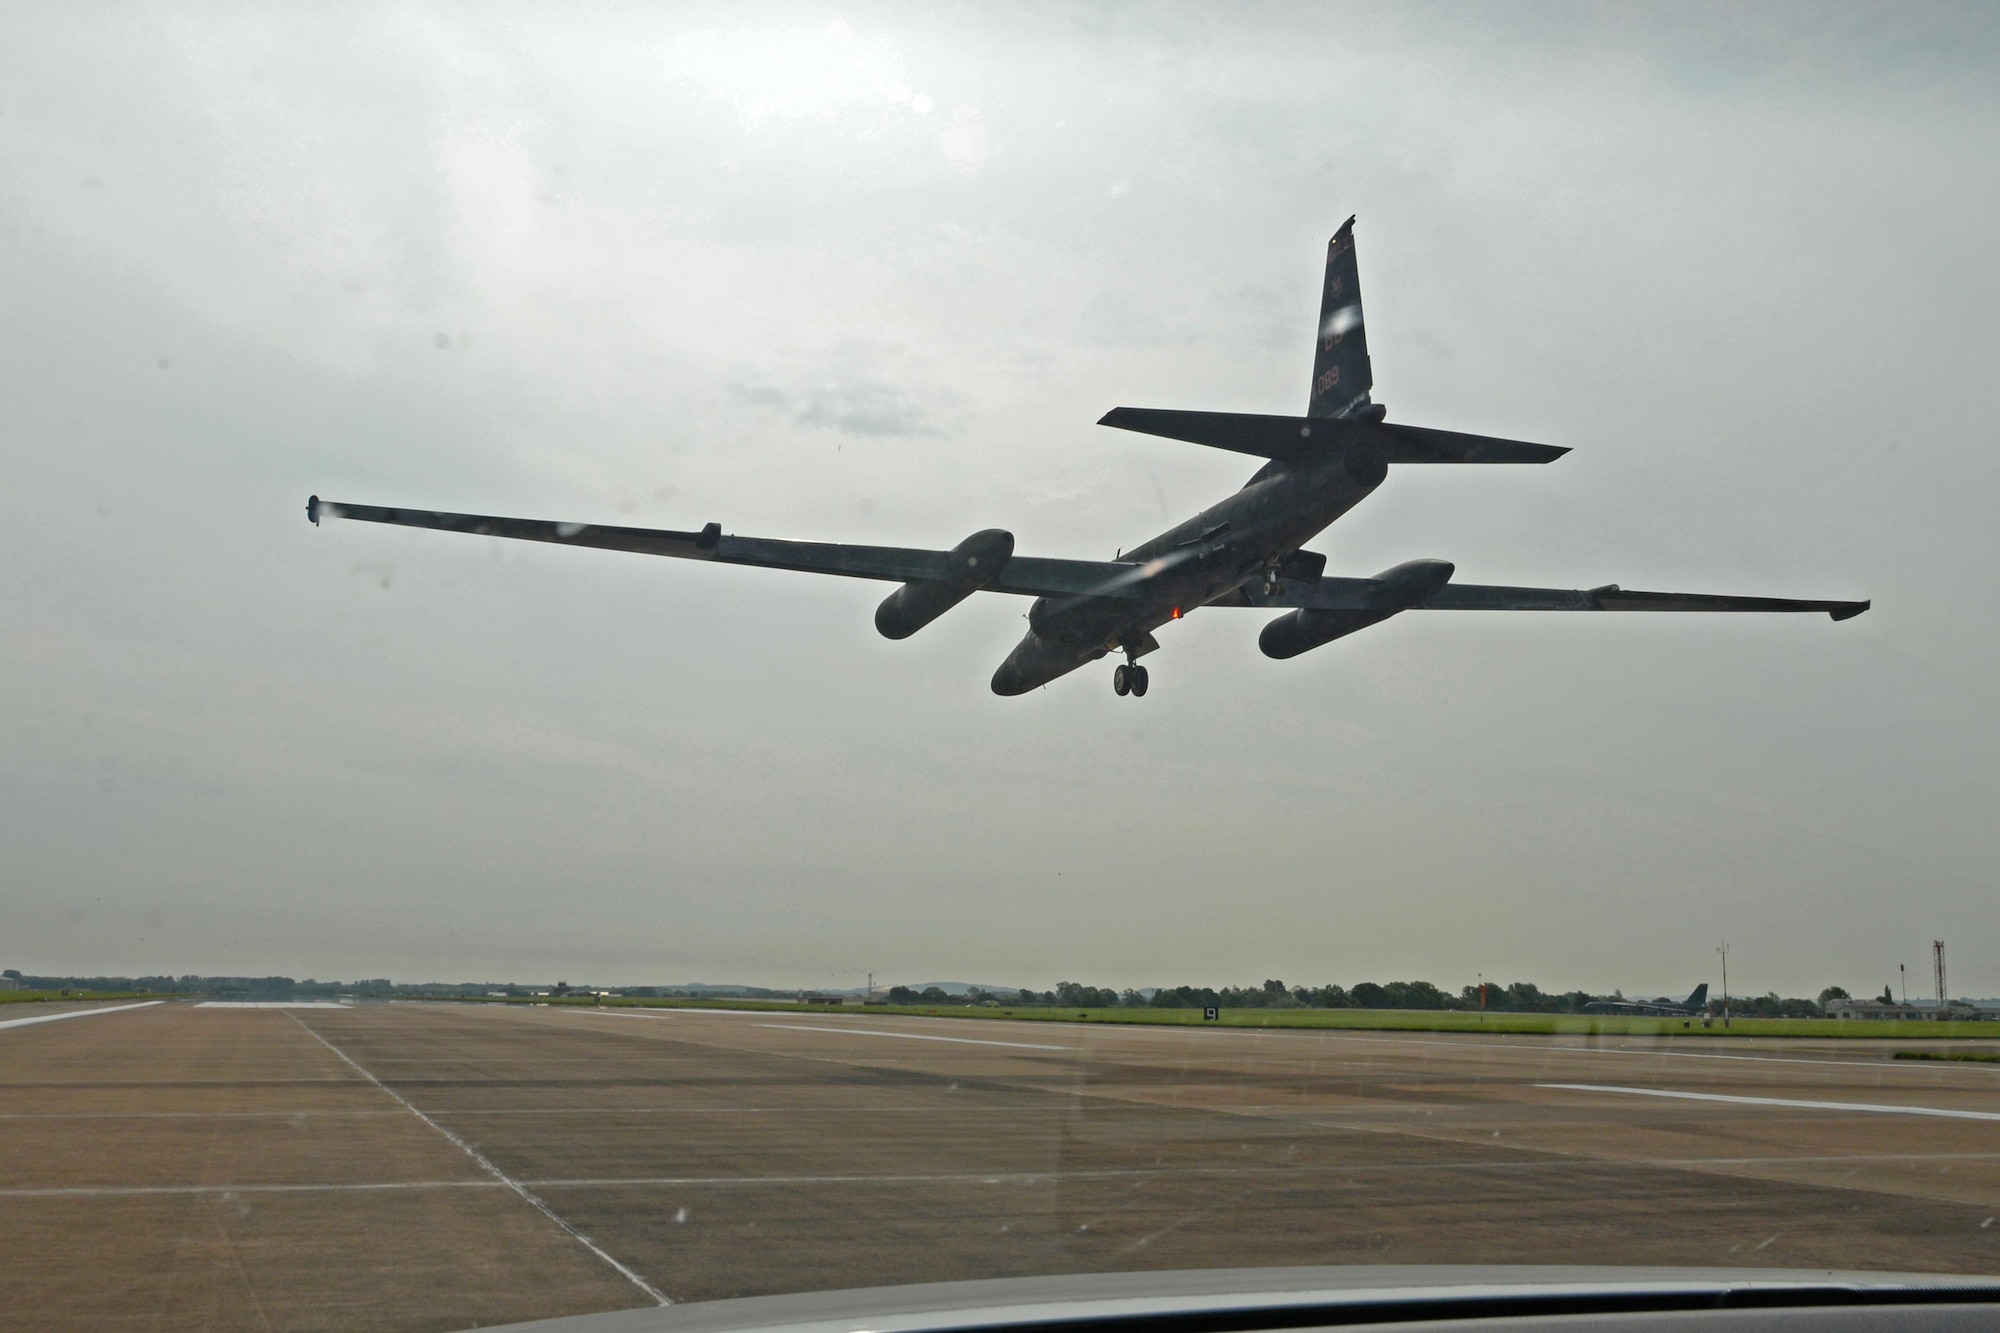 A U-2 Dragon Lady prepares to land June 7, 2016, at Royal Air Force Fairford, Gloucestershire, England. The jet was met by an en route recovery team (ERT) in England to transition aircraft from and to Beale Air Force Base, California, and forward operating locations (FOL). The ERT is used like a pit crew at the midway point in Fairford, ensuring the aircraft are prepared to make it to their next destination. (U.S. Air Force photo by Senior Airman Benjamin F. Bugenig)